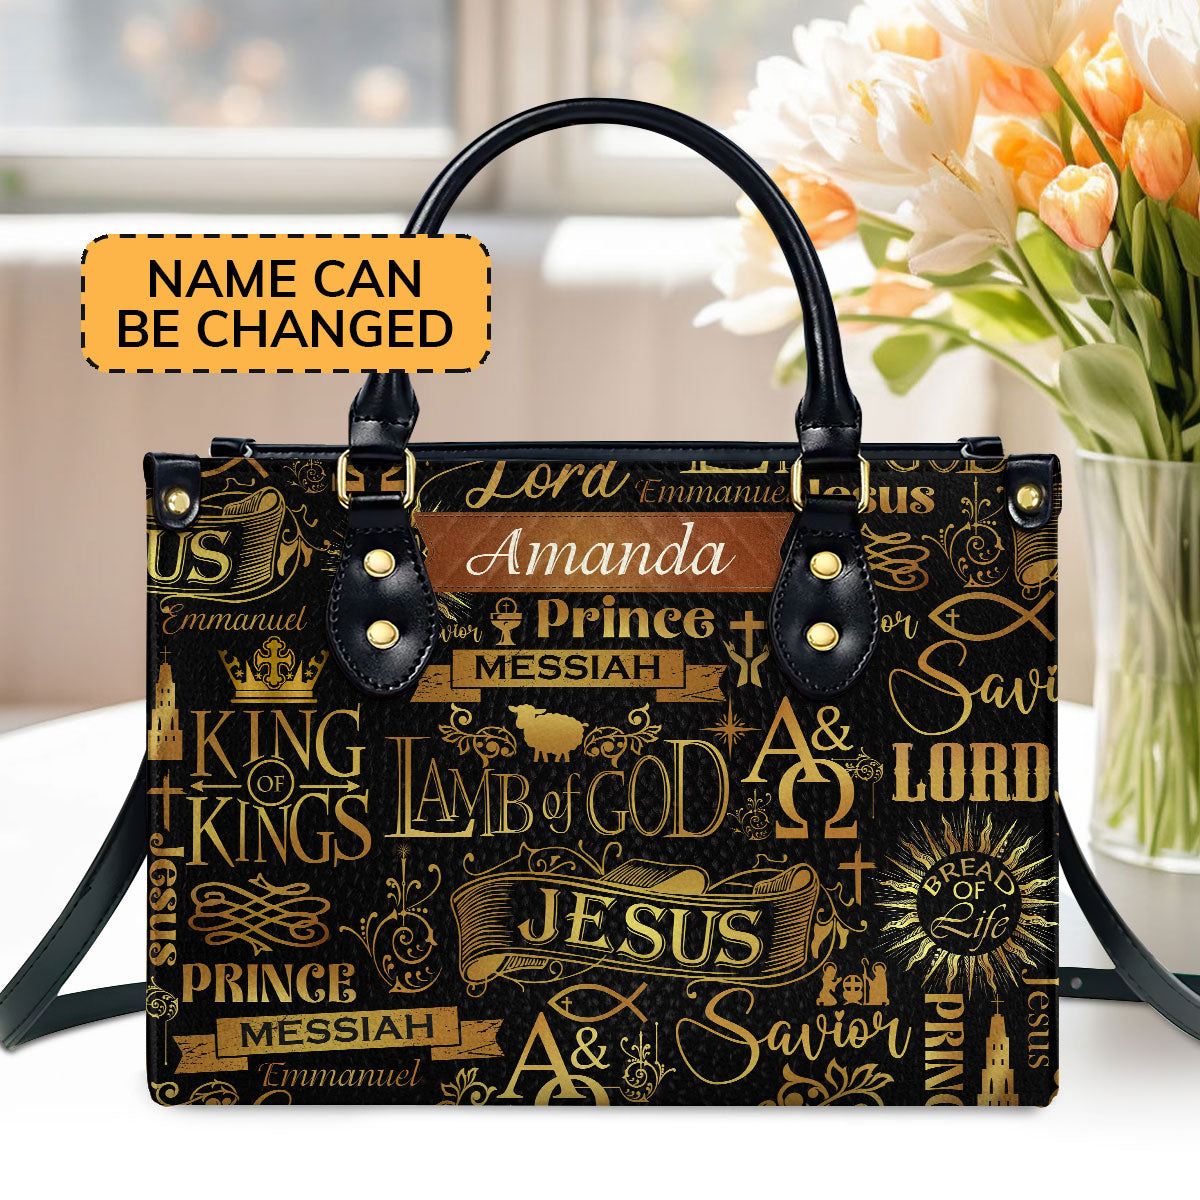 Lamb Of God  Personalized Leather Handbag With Zipper - Inspirational Gift Christian Ladies